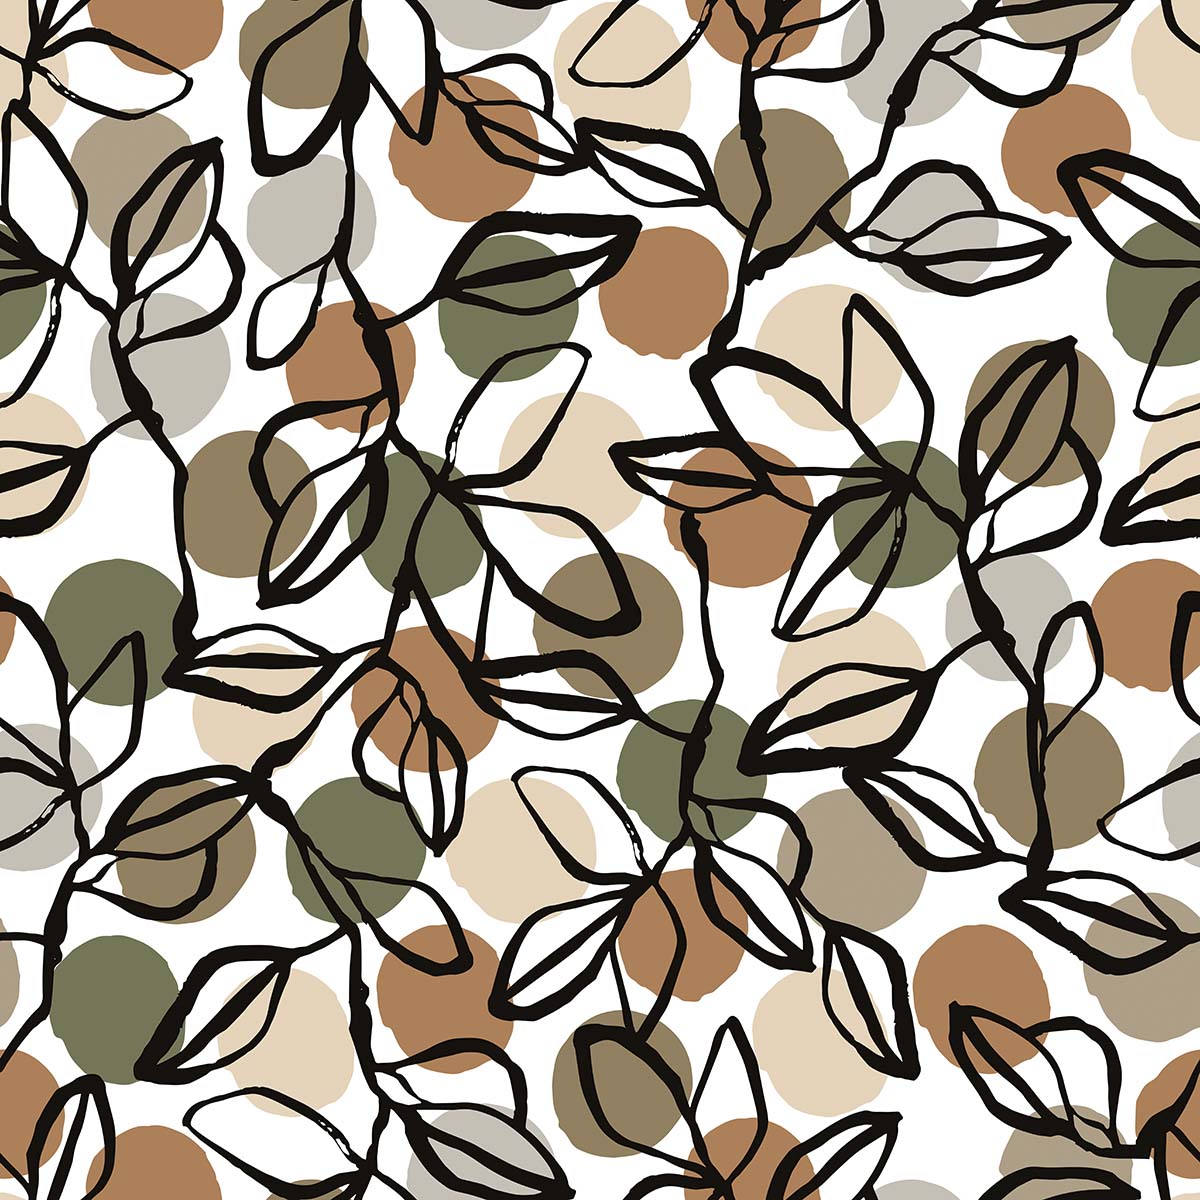 A pattern of leaves and dots